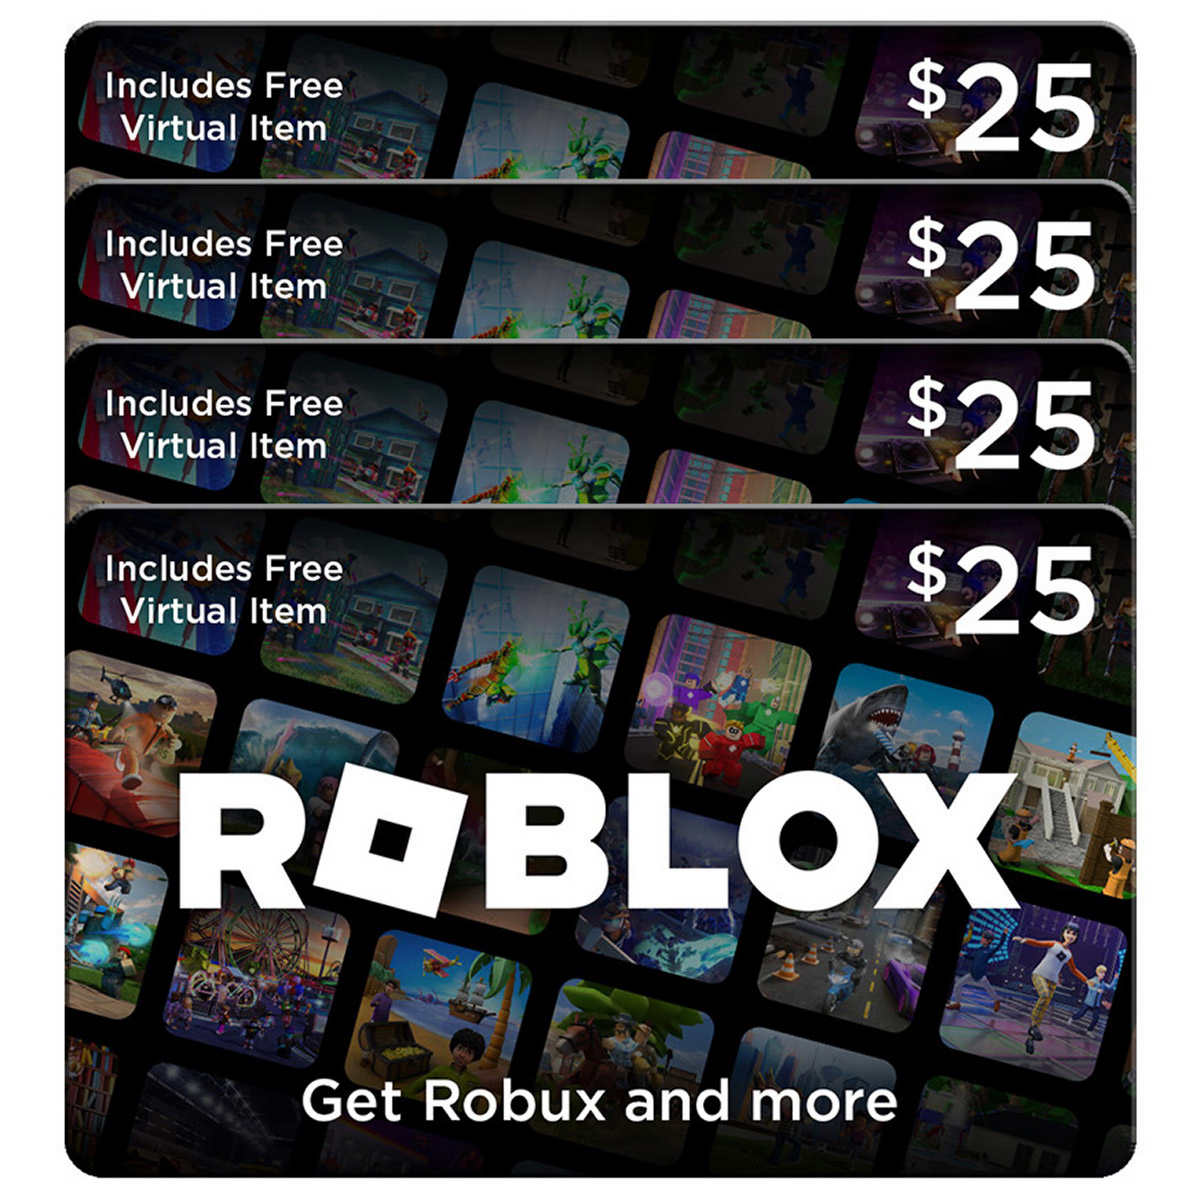 Roblox Four $25 Gift Cards Digital Download, Includes Exclusive Virtual  Item | Costco